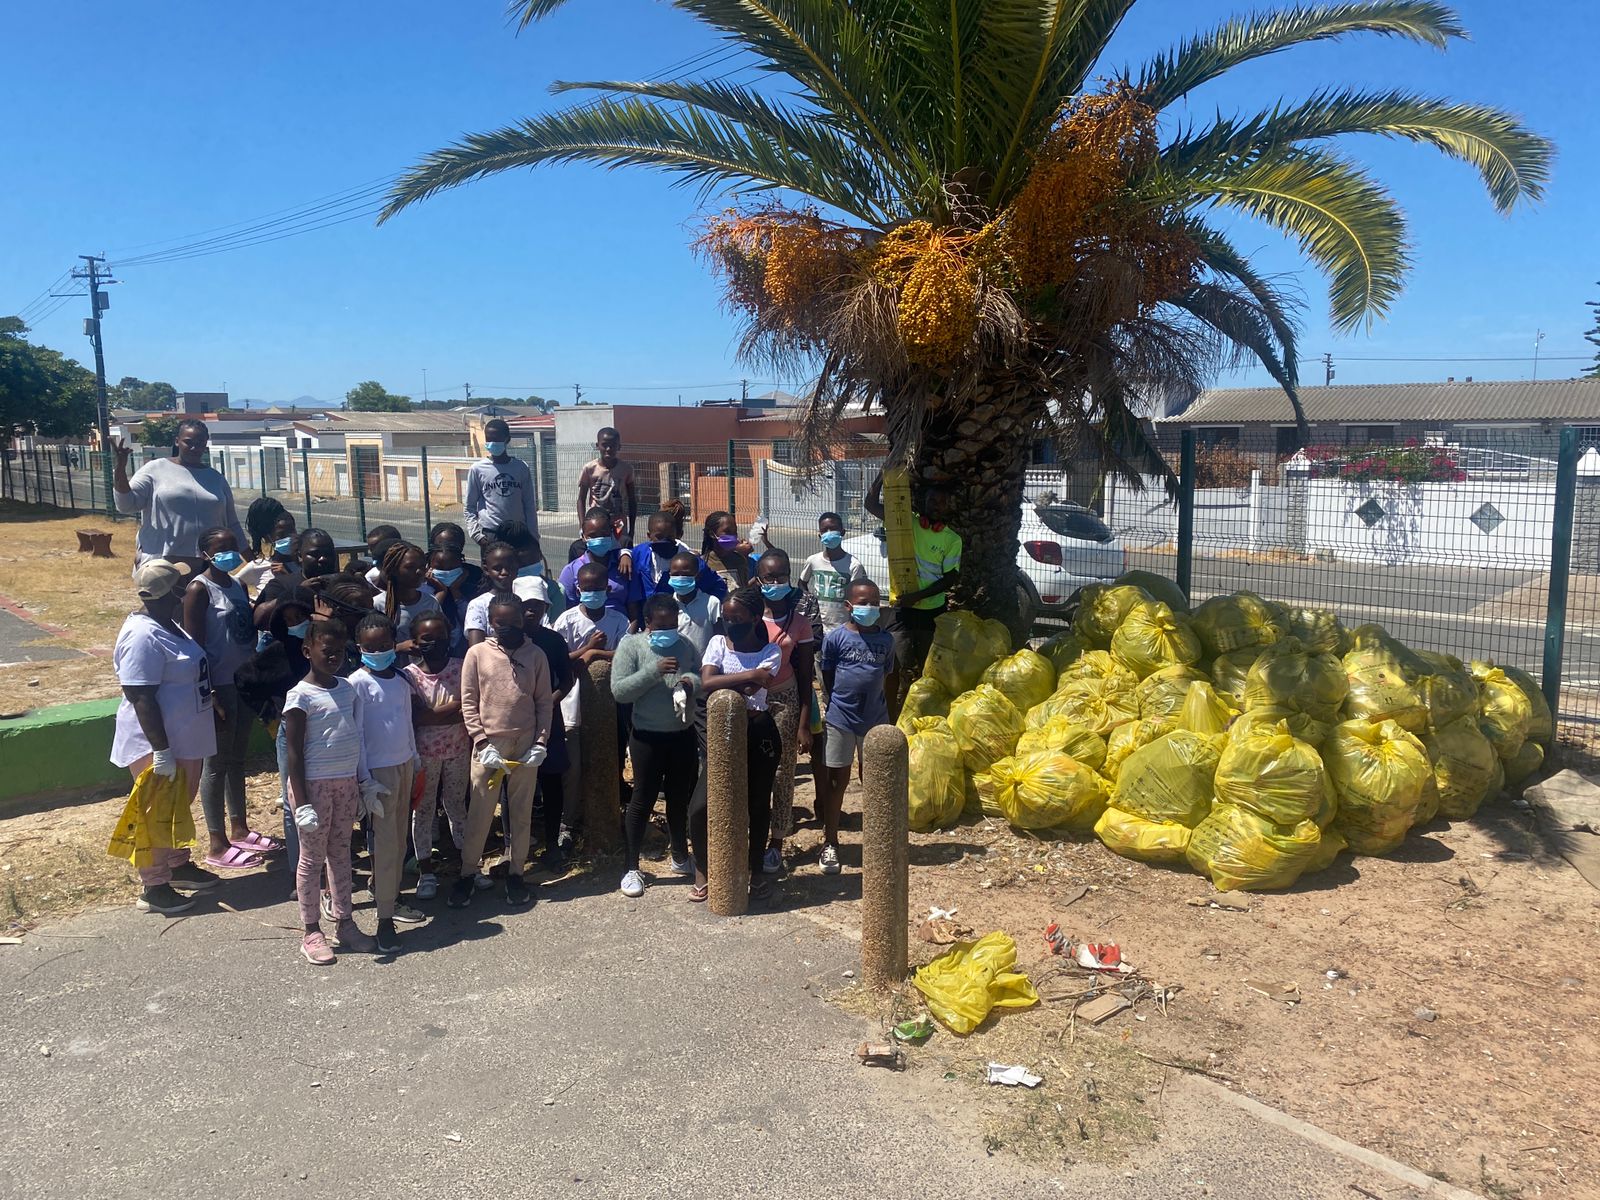 The children of Gugulethu deserve clean and safe parks to play in!